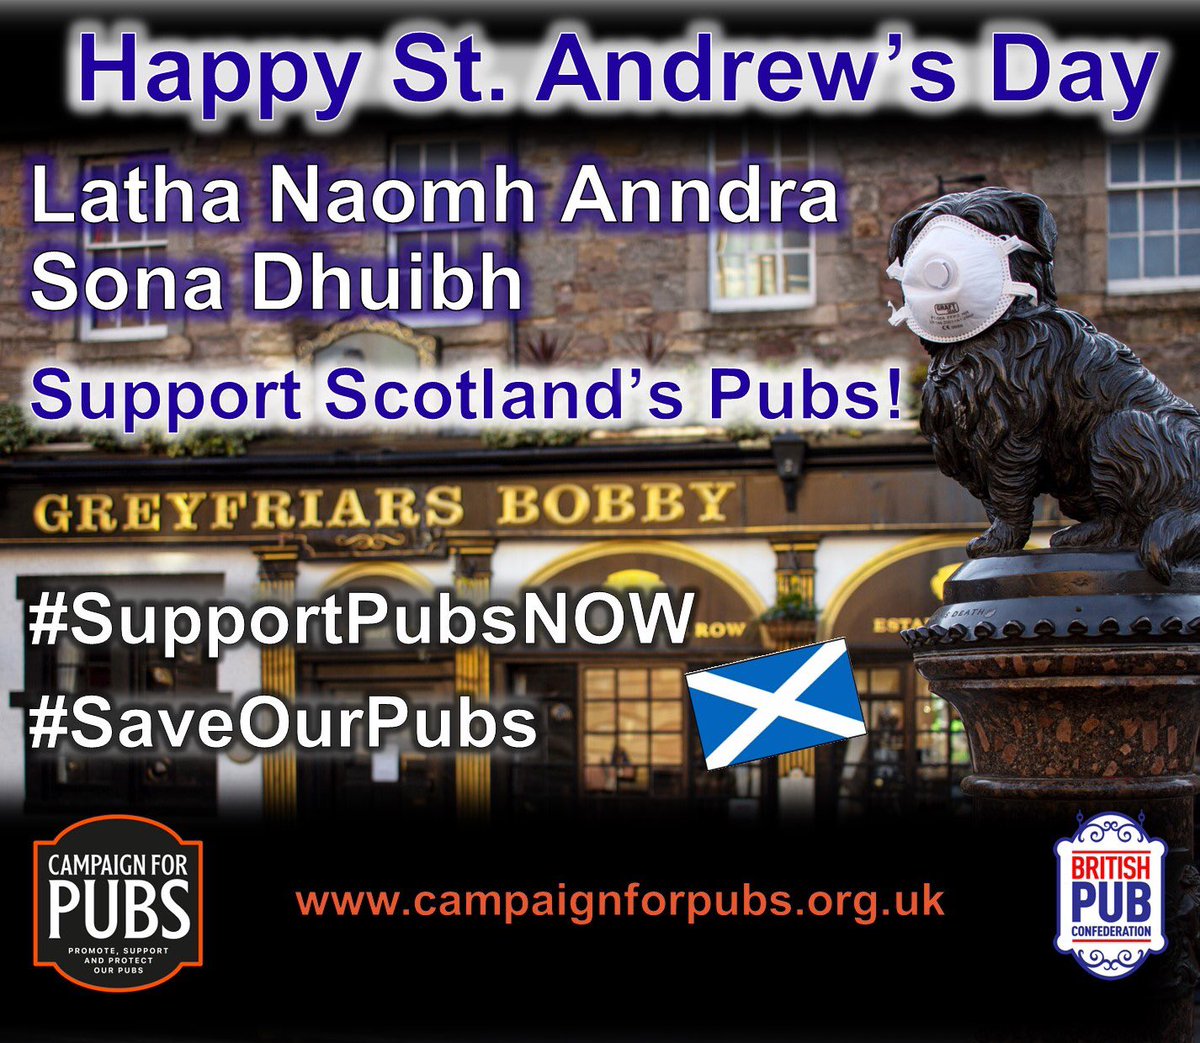 There’s never been a tougher time, but important to say #HappyStAndrewsDay to all #Scottish #pubs, #publicans & brewers & suppliers & all Scottish #pub lovers in #Scotland & everywhere 🏴󠁧󠁢󠁳󠁣󠁴󠁿🍻🥃 

Here’s to more support & a better 2021 🙏

#StAndrewsDay #SupportPubsNOW #SaveOurPubs